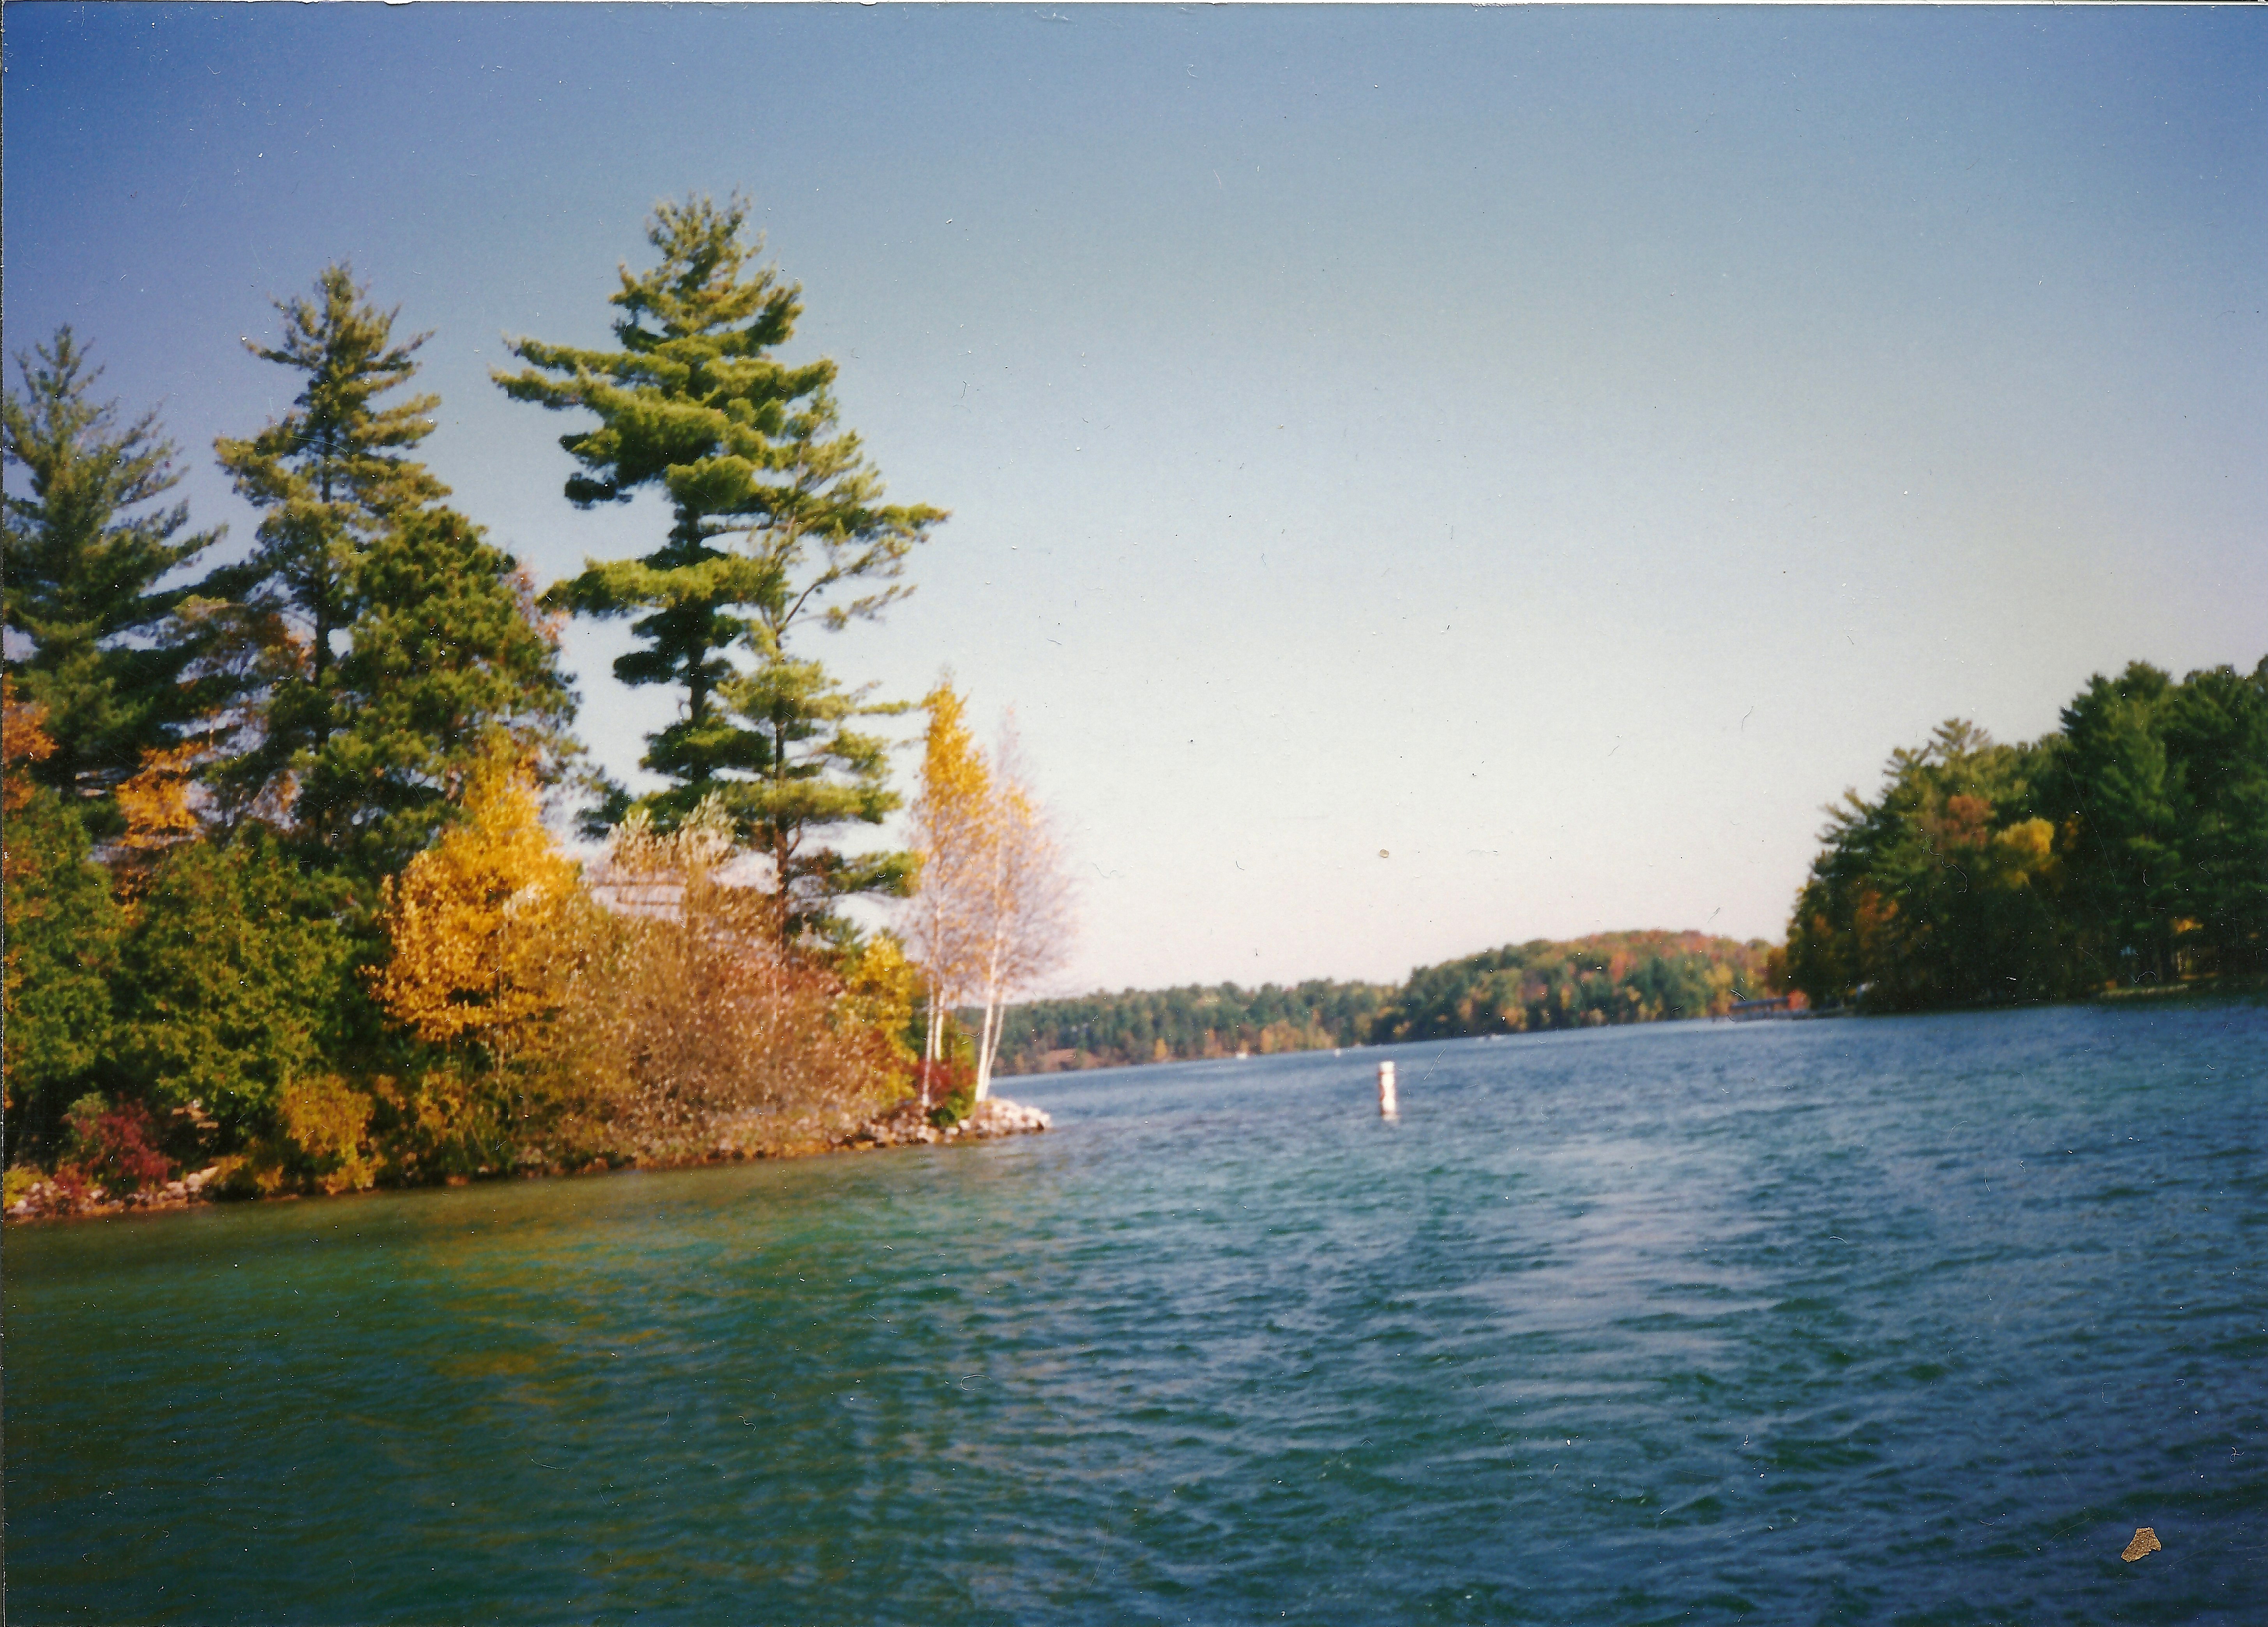 Nessling Lake with Rainbow Lake and Government Island in background.